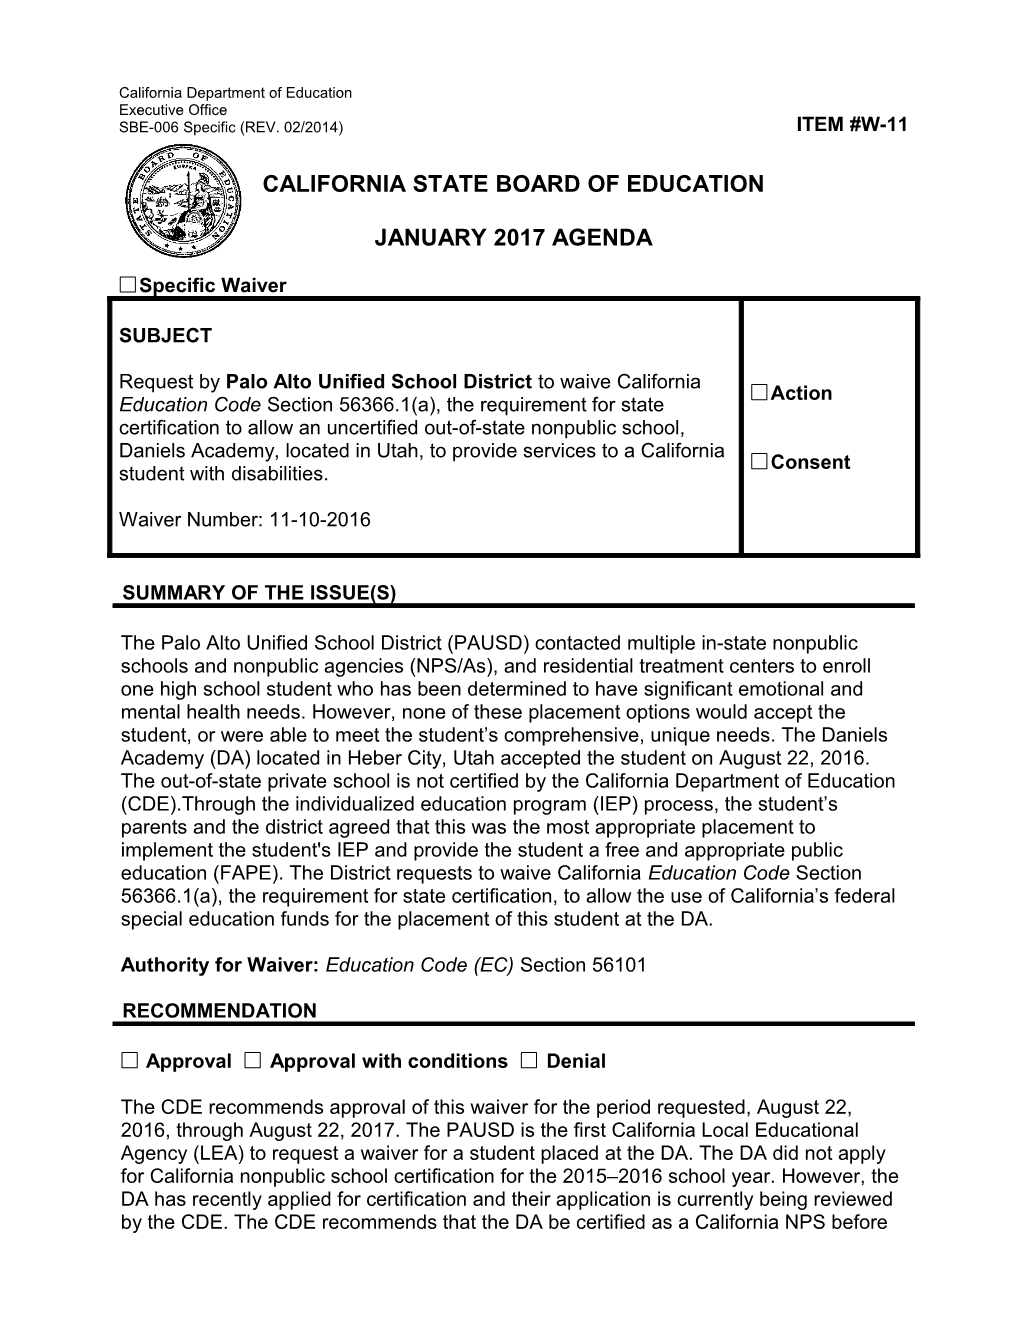 January 2017 Waiver Item W-11 - Meeting Agendas (CA State Board of Education)